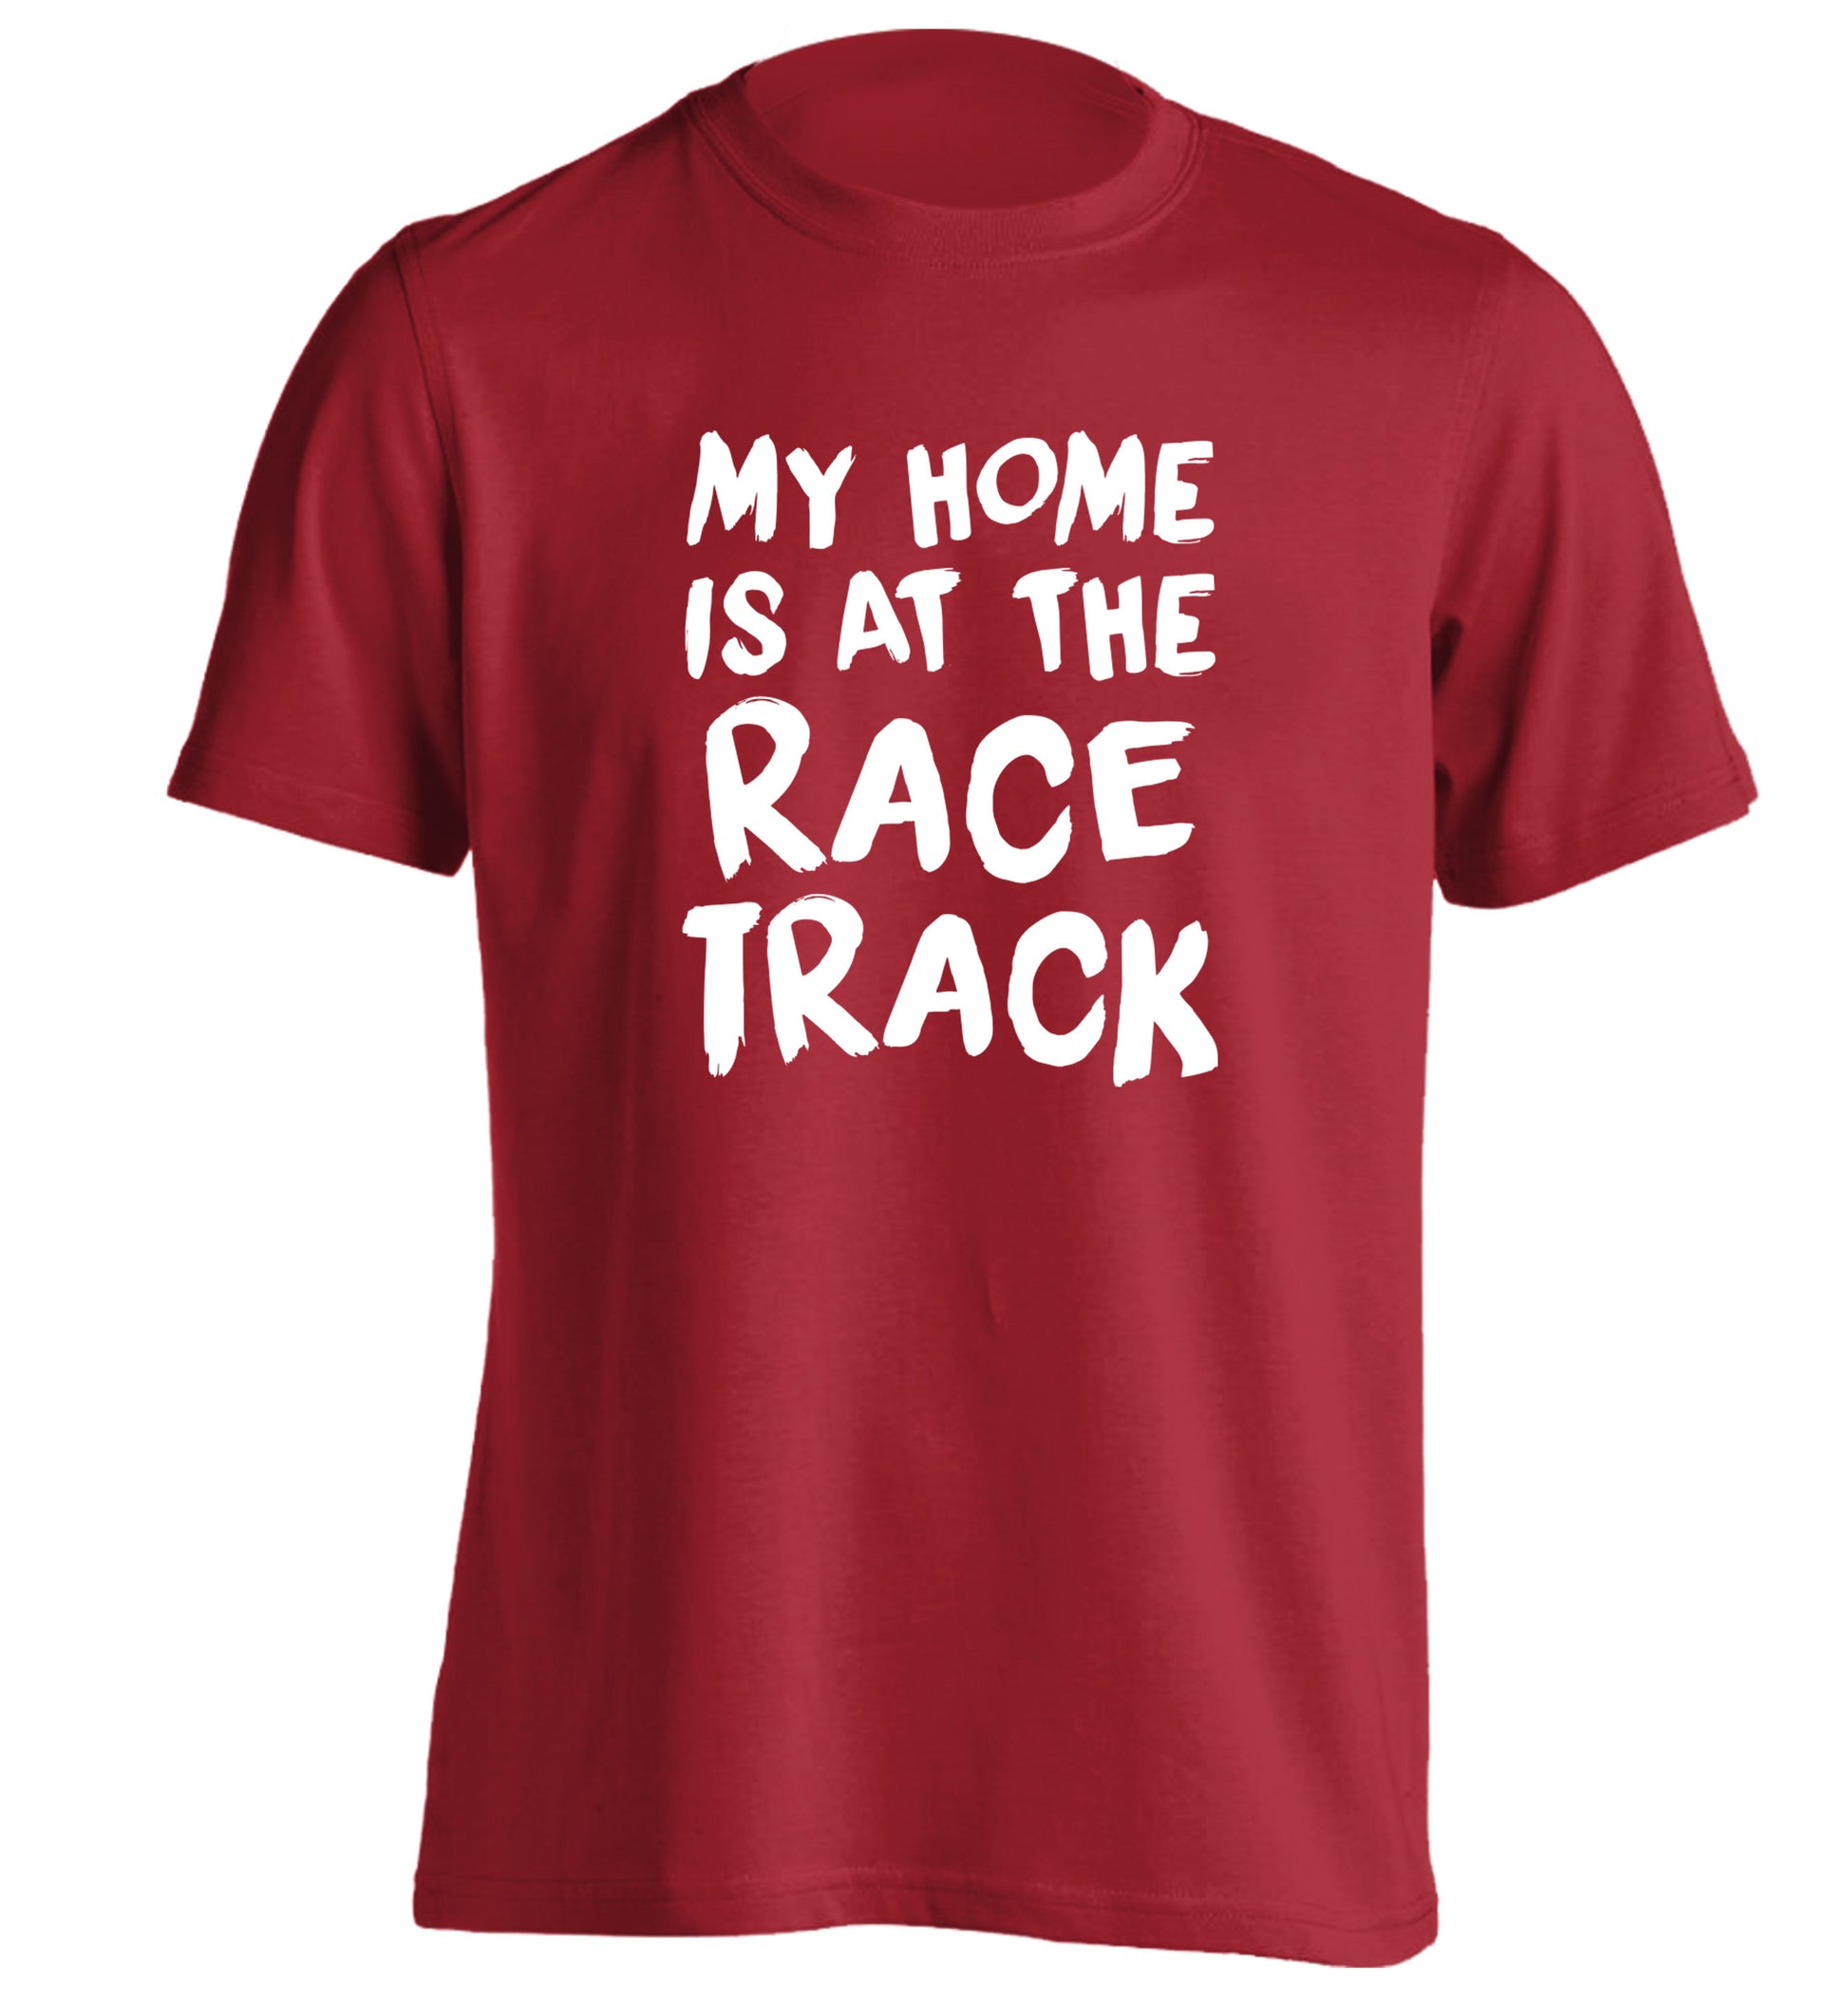 My home is at the race track adults unisex red Tshirt 2XL